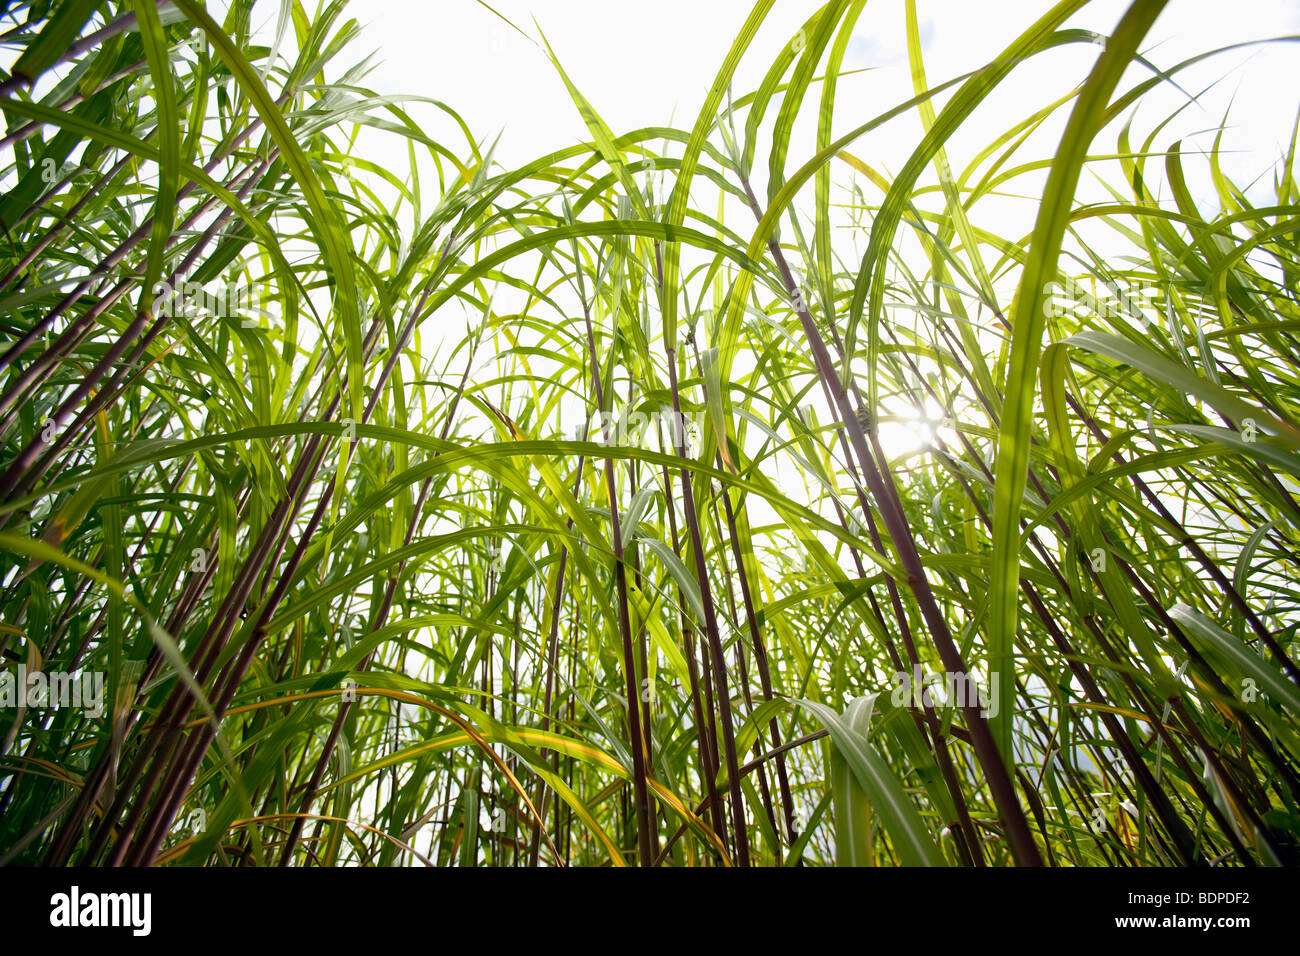 A crop of Elephant Grass (Miscanthus) growing in a field in Worcestershire, England, UK Stock Photo